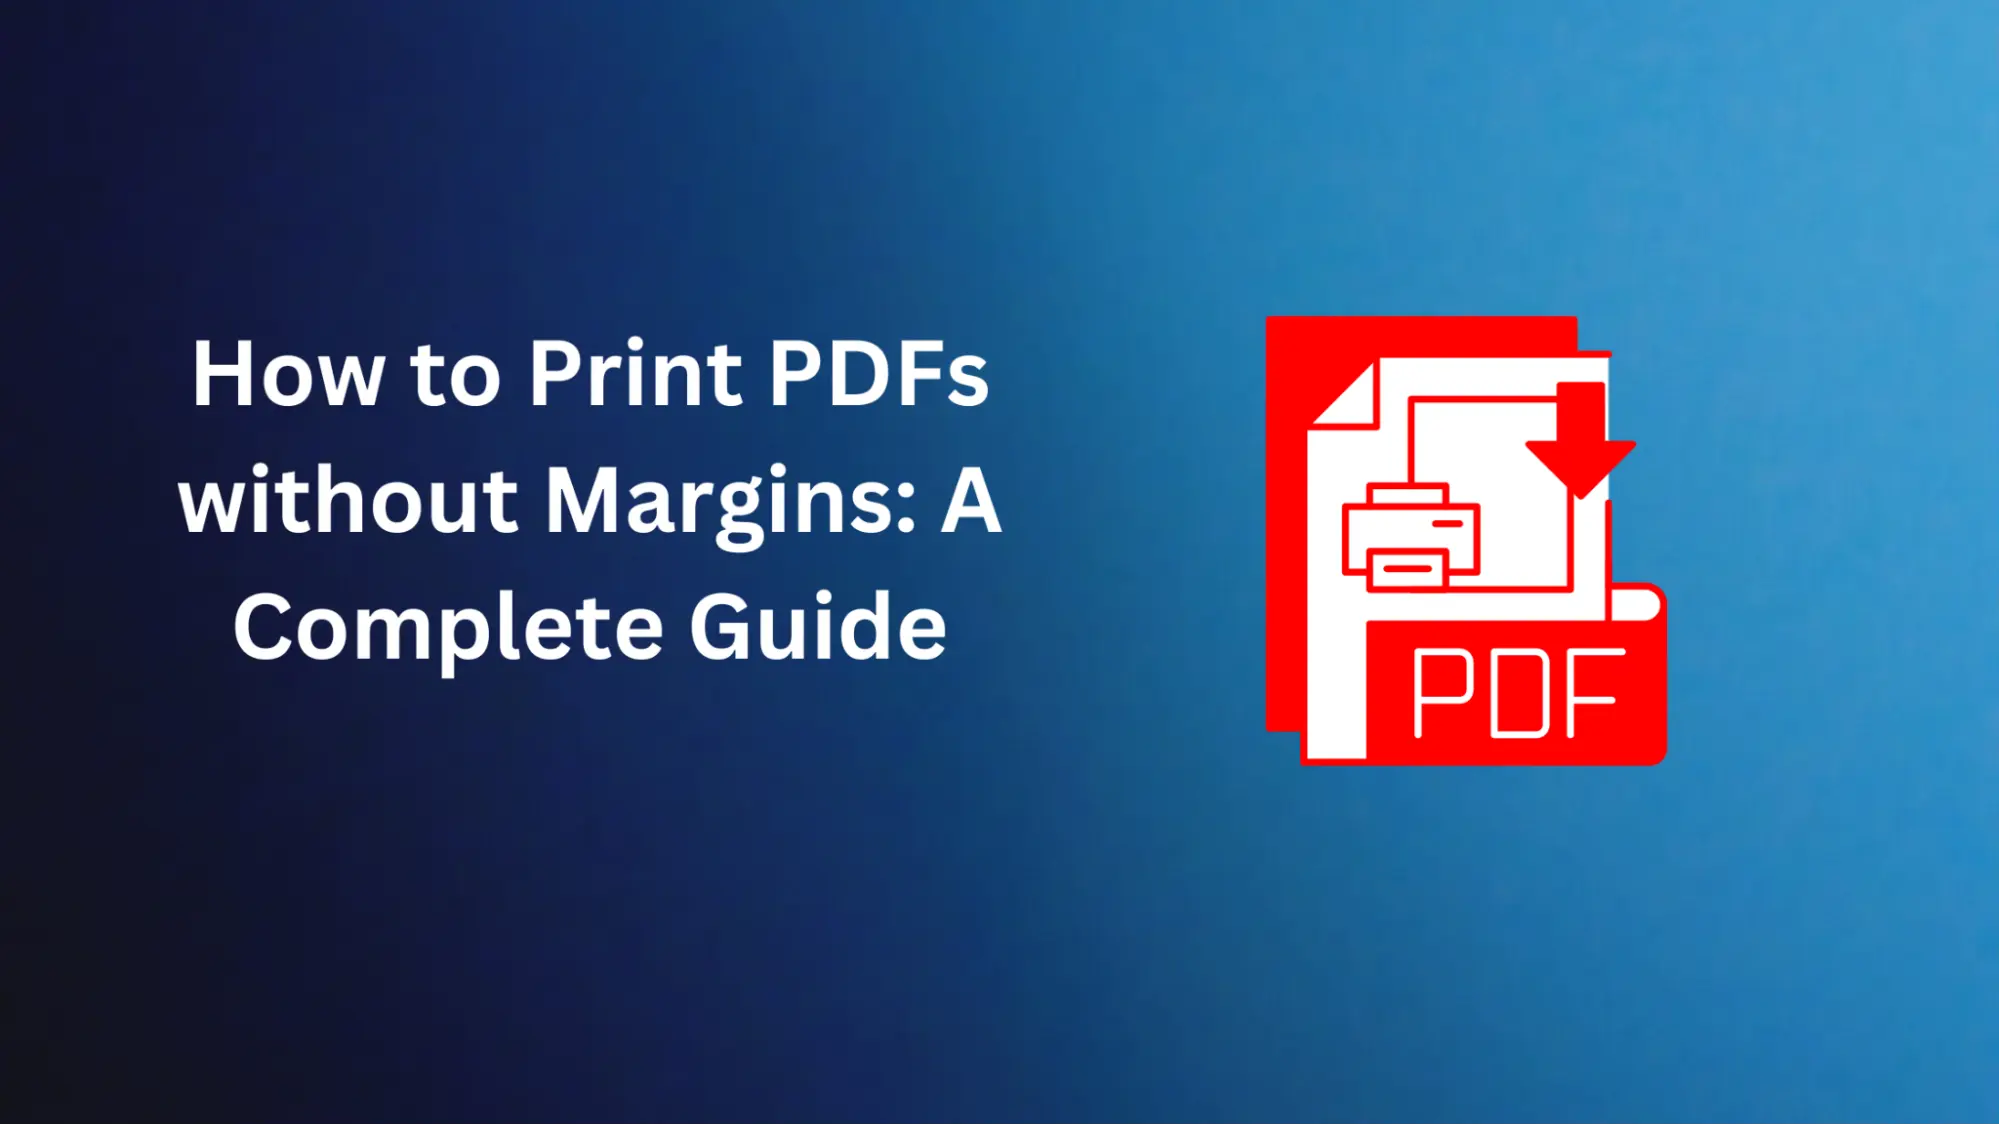 How to Print PDFs without Margins: A Complete Guide